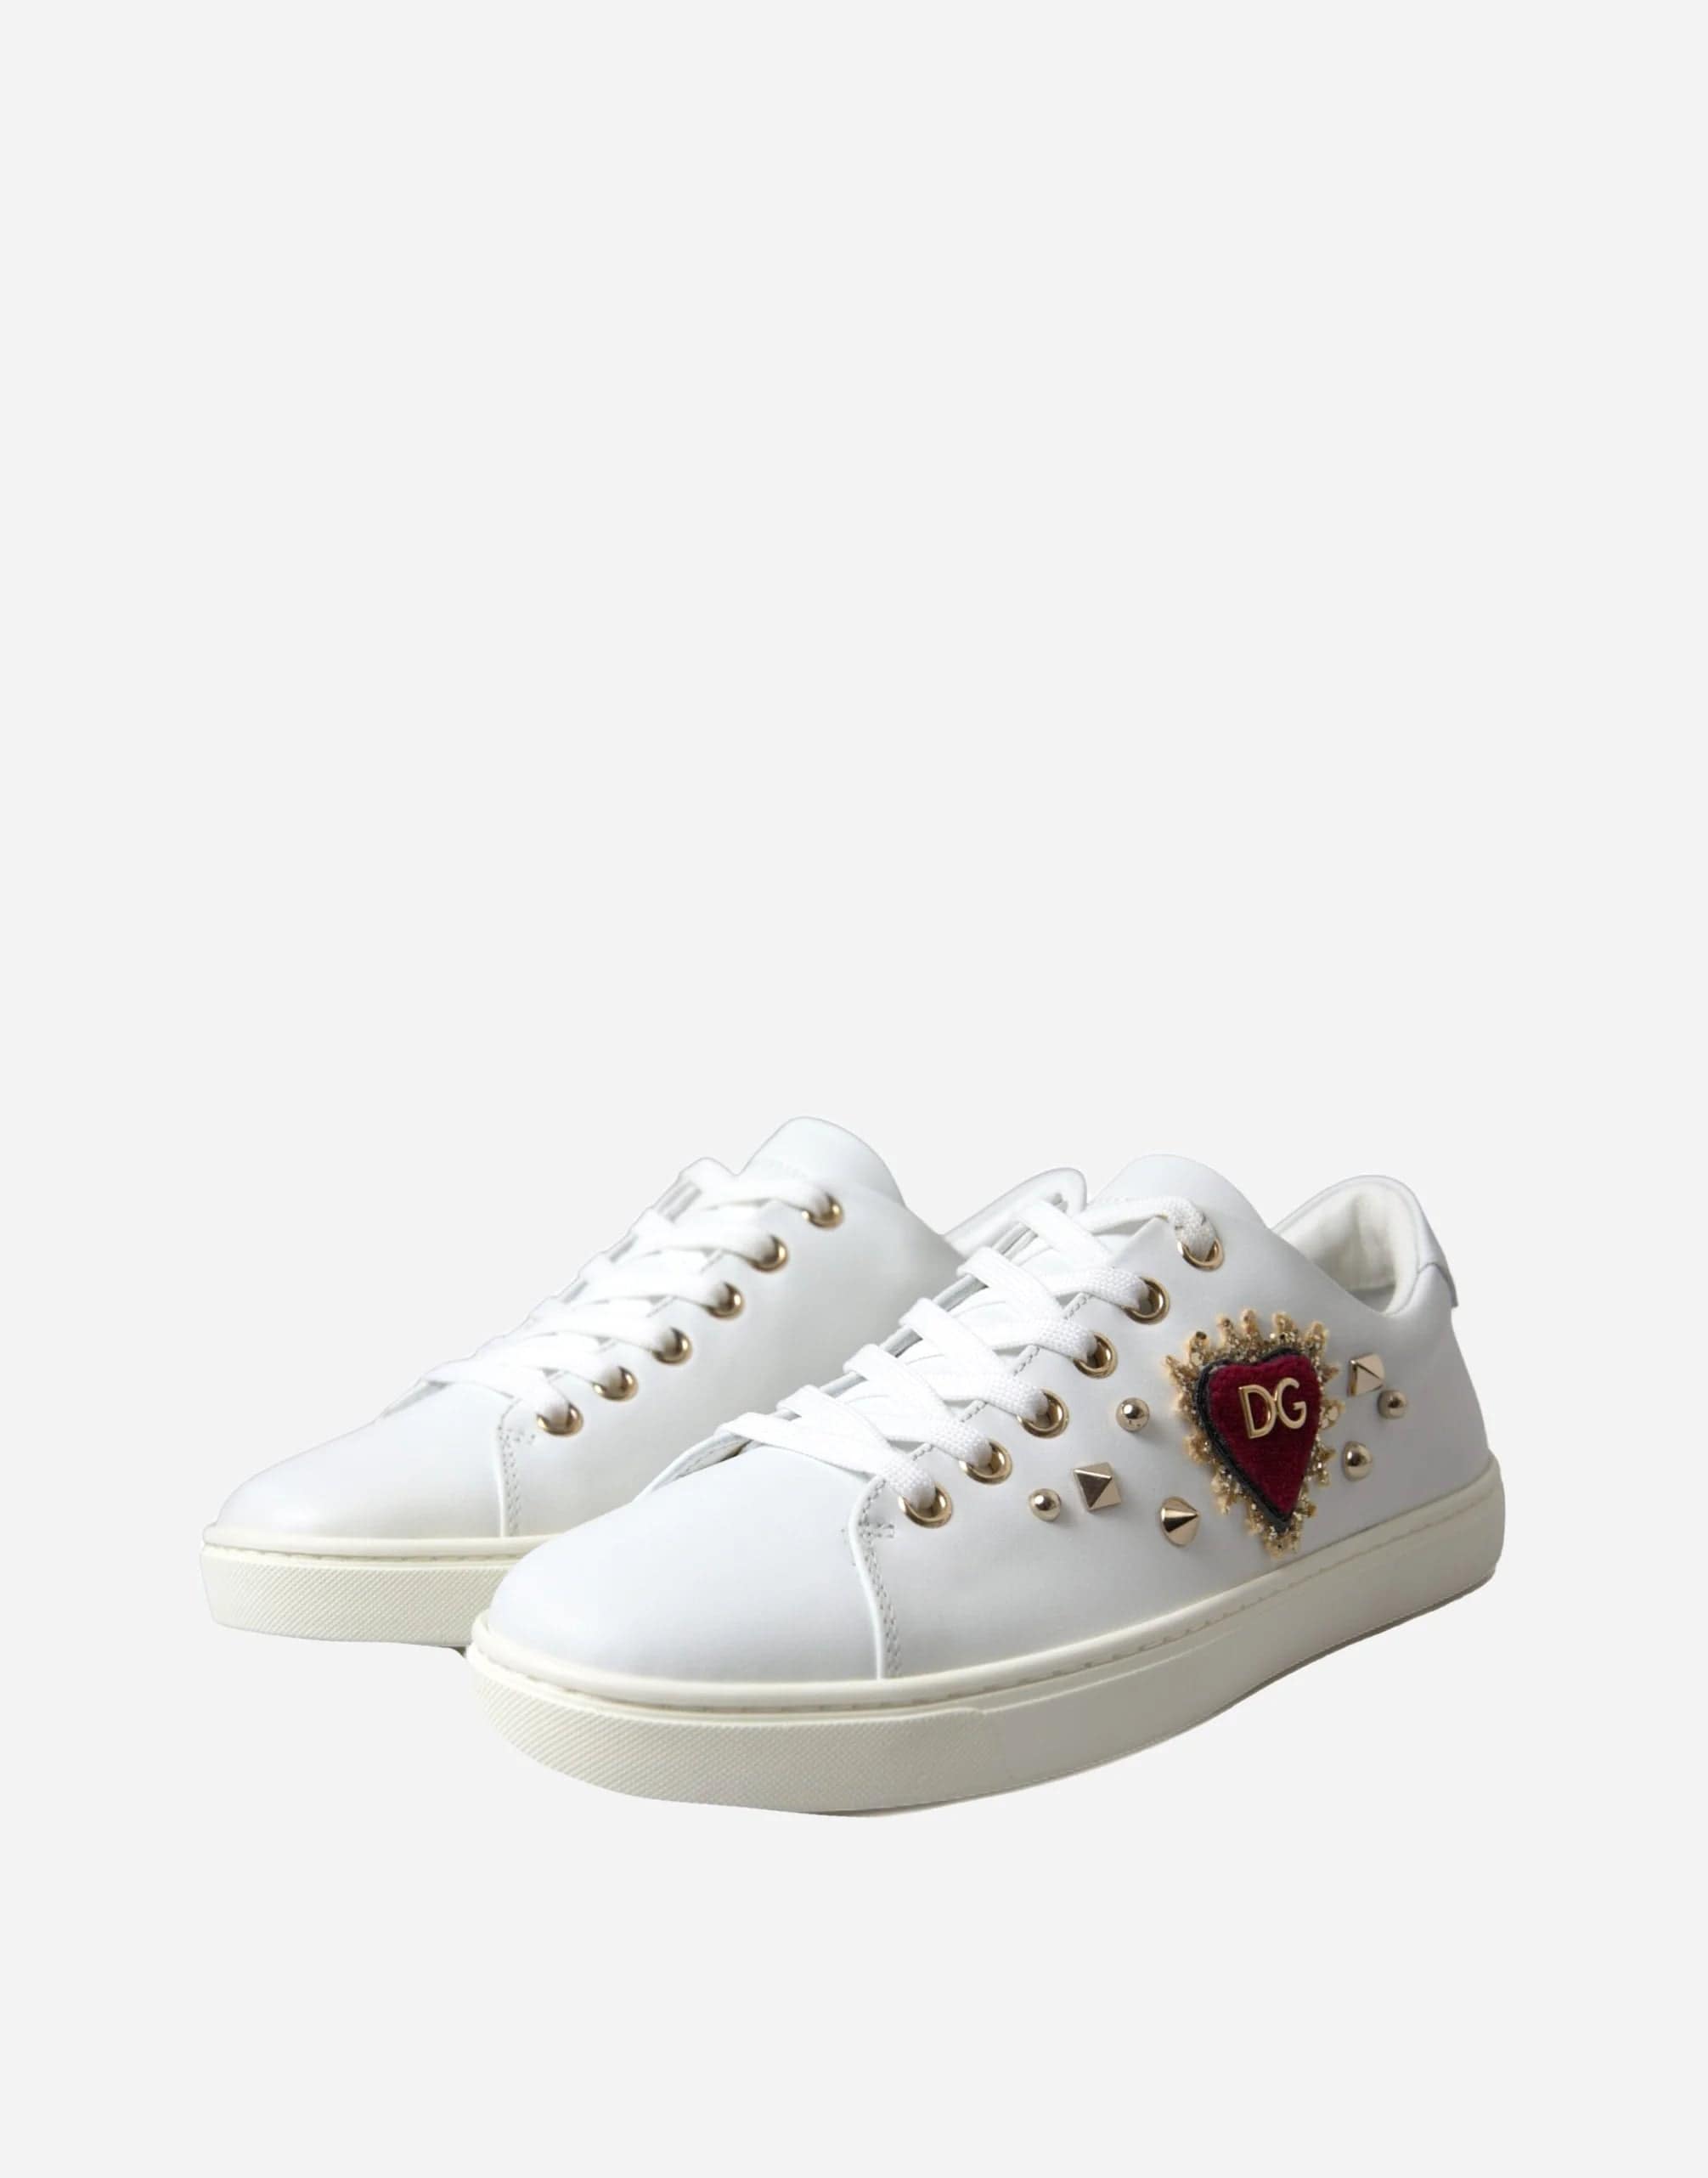 Dolce & Gabbana Studded Heart Embroidery Sneakers